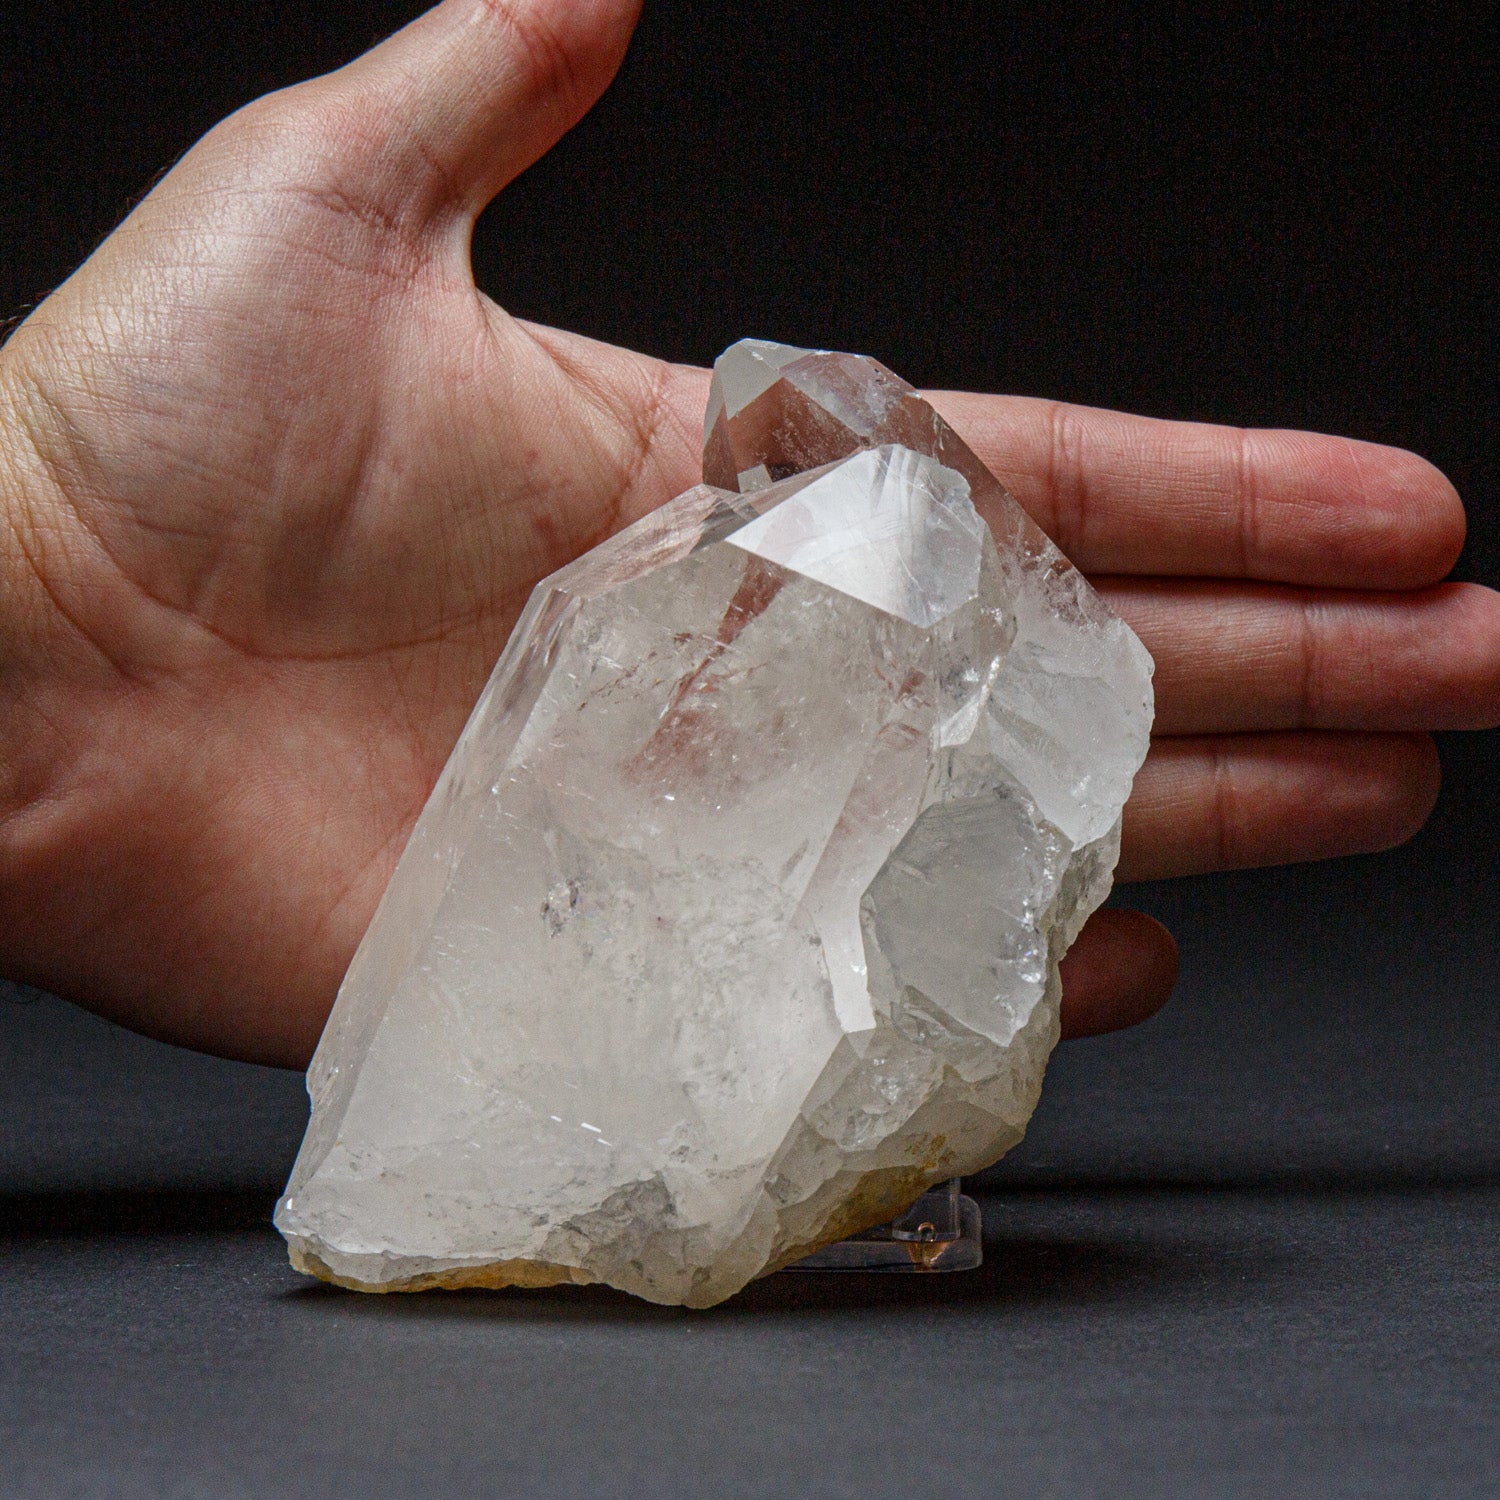 Genuine Clear Quartz Crystal Cluster Point from Brazil (1.2 lbs)